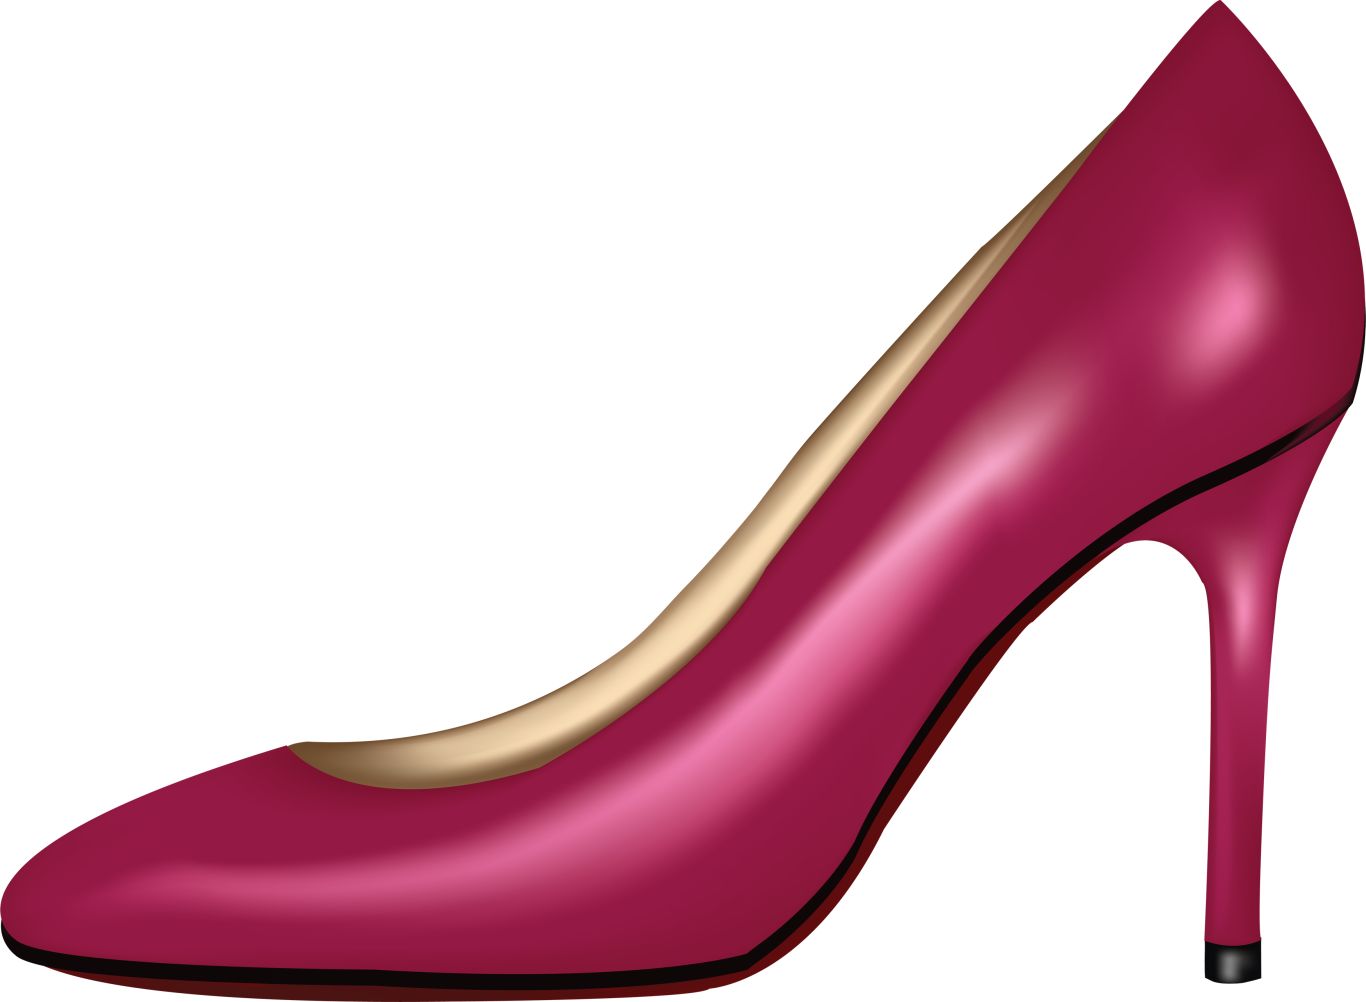 Women shoes PNG image    图片编号:7470